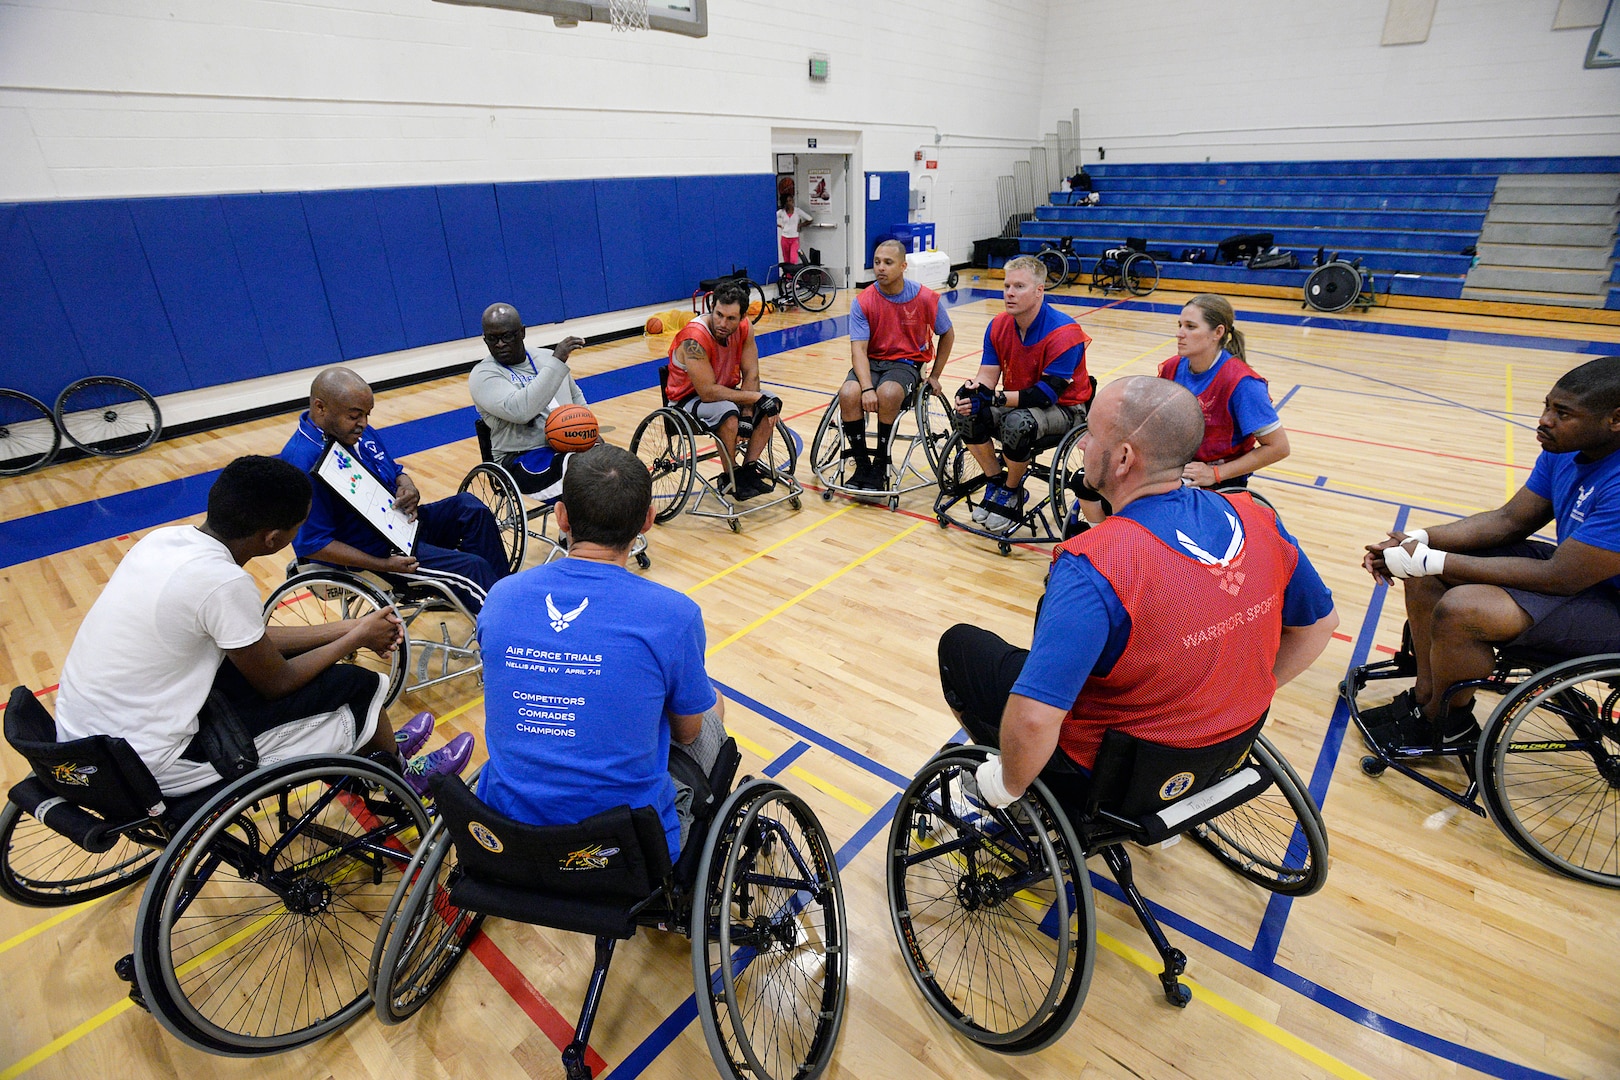 Wounded warriors gather around to learn a play during the final Warrior Games training camp at the Academy Aug. 5. More than 60 wounded veterans from across the country participated in the final Warrior and Invictus Games training camp here Aug. 3-7 to prepare for the fall games, motivate others and take a healthy step toward recovery. (U.S. Air Force photo/Mike Kaplan)